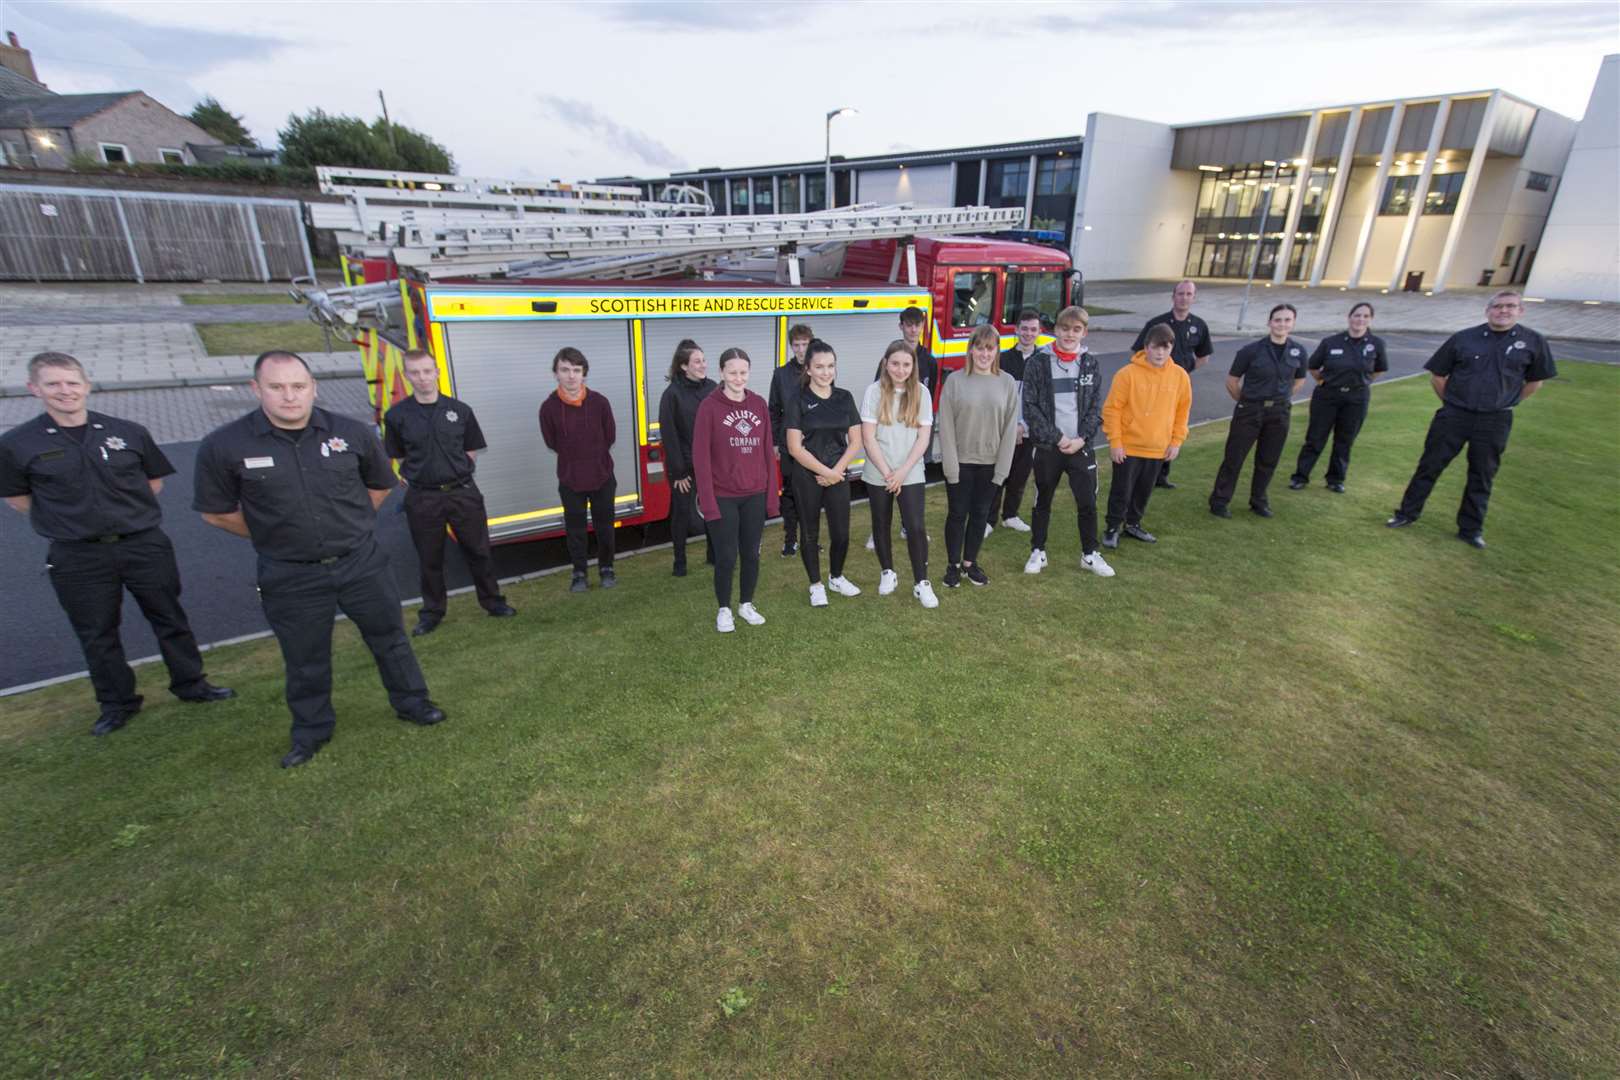 Some of the young people taking part in the Wick Youth Volunteer Scheme along with some of the local firefighters (from left) Crew Commander Graeme Miller, firefighter Mark Waring, firefighter Graeme Sinclair, Watch Commander Andrew Mackay, the local scheme co-ordinator, firefighter Abbie Douglas, Watch Commander Kara Simpson and Watch Commander Colin Gunn. Picture: Robert MacDonald/Northern Studios